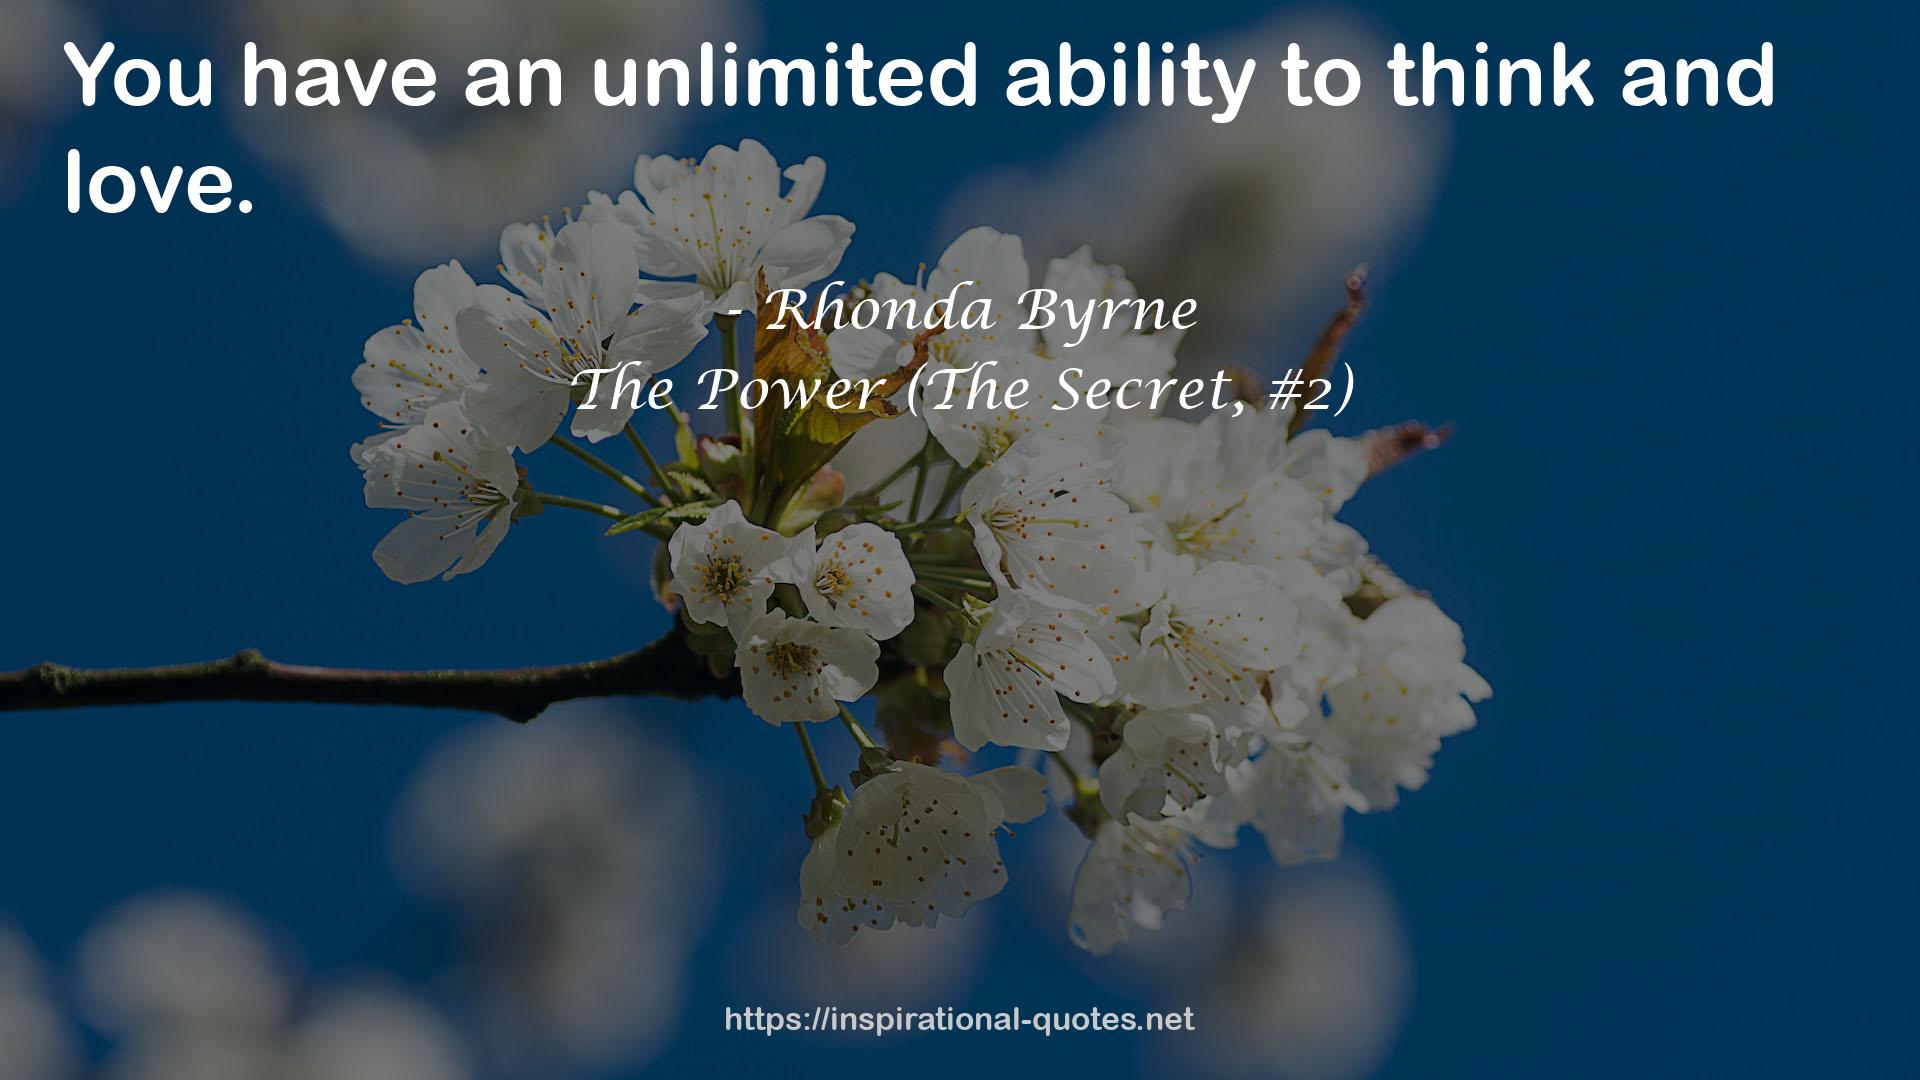 The Power (The Secret, #2) QUOTES